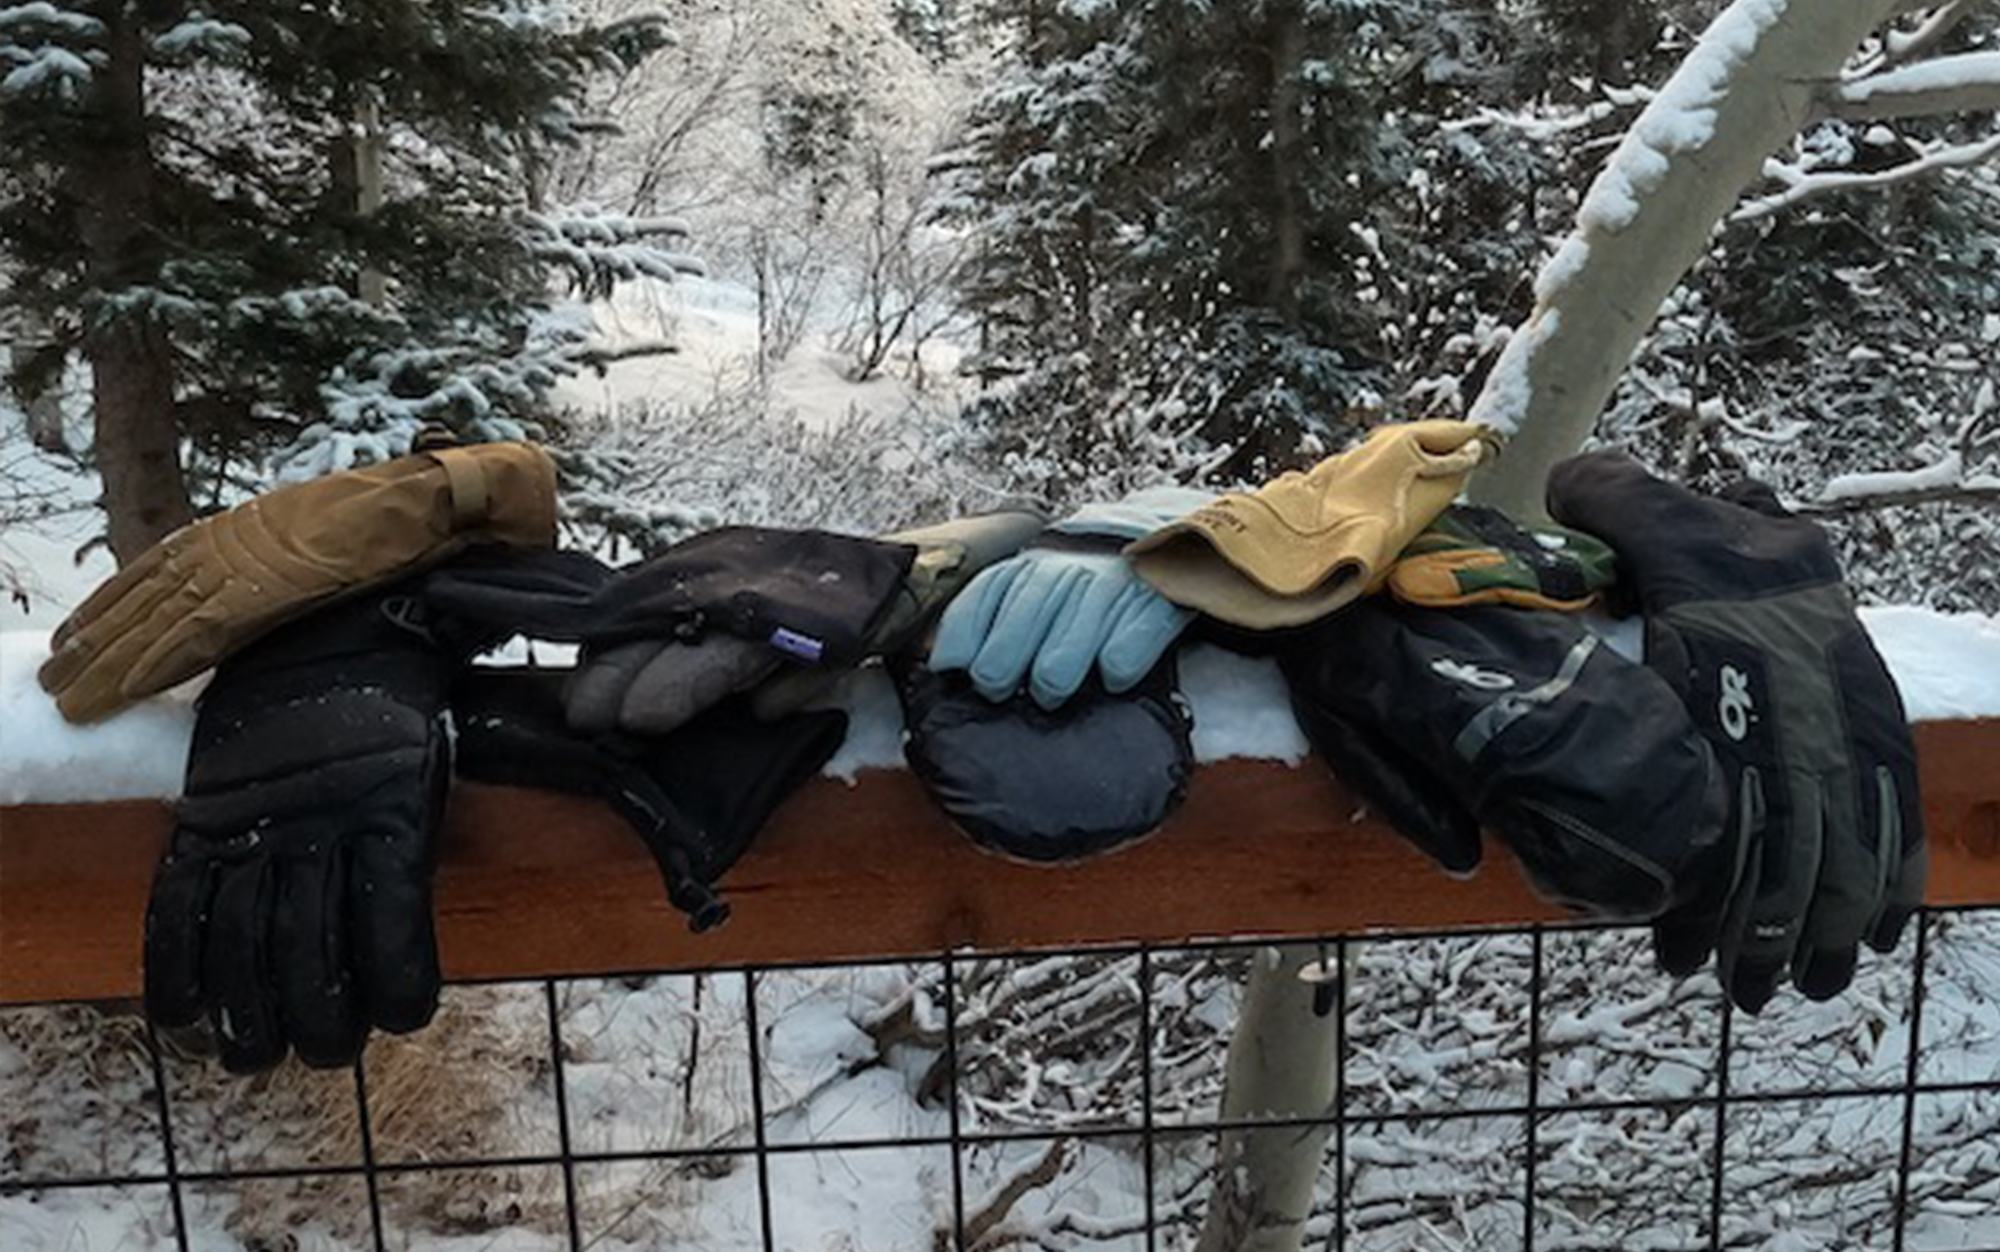 To choose the best winter gloves, finding the right size is key.